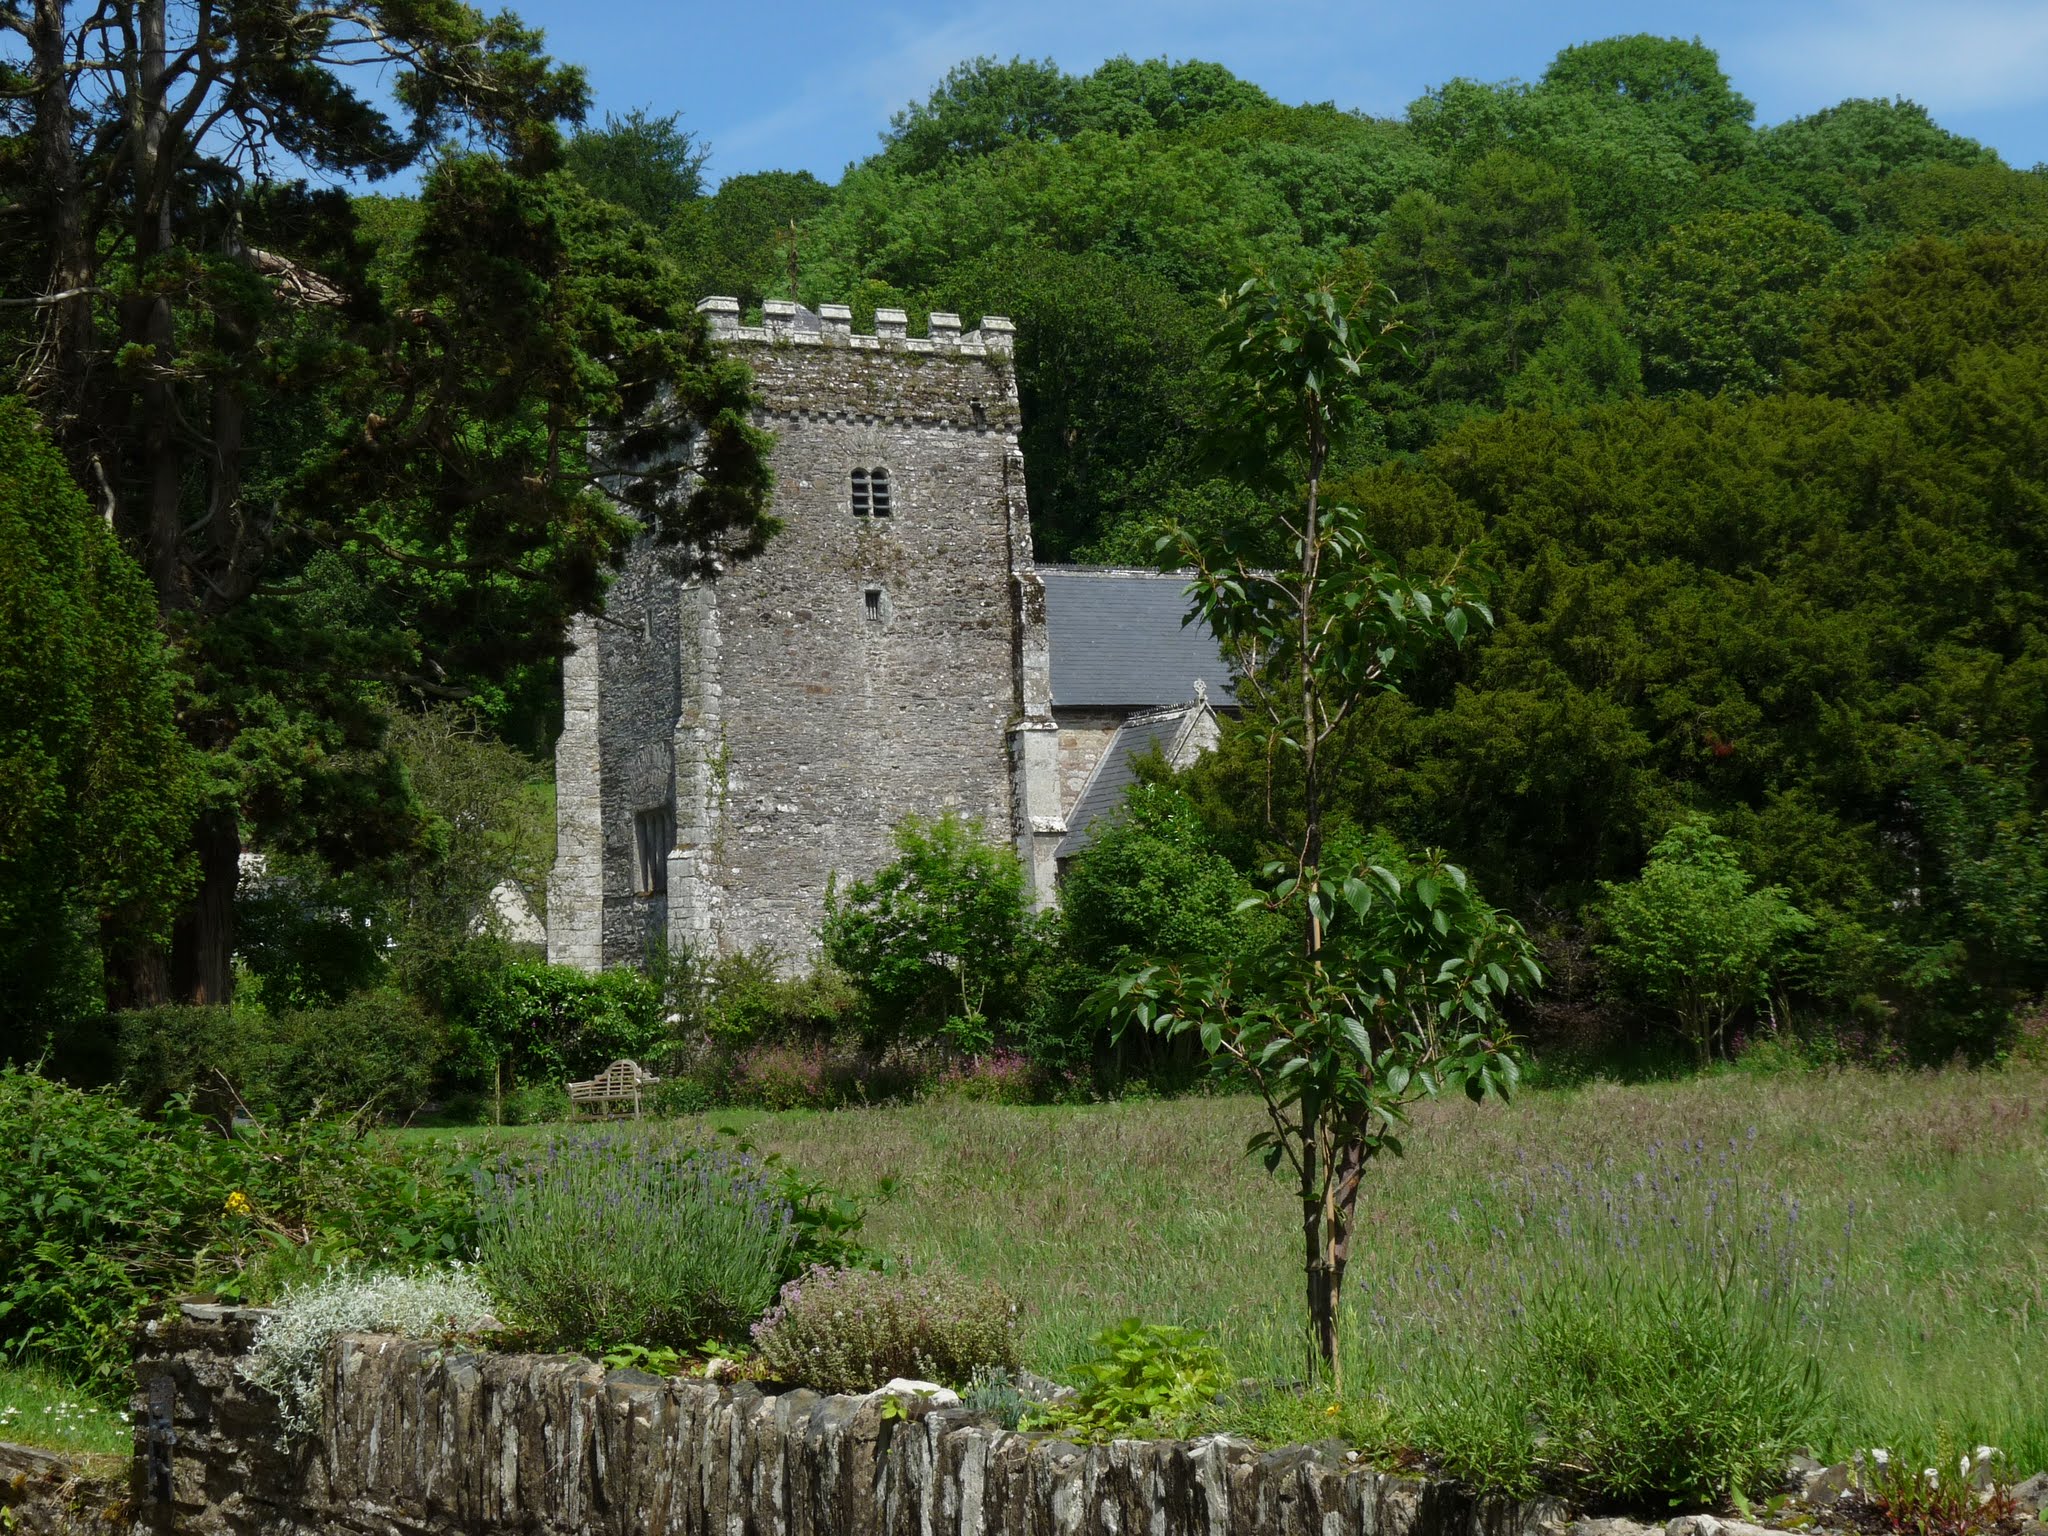 The church of St Brynach in Nevern